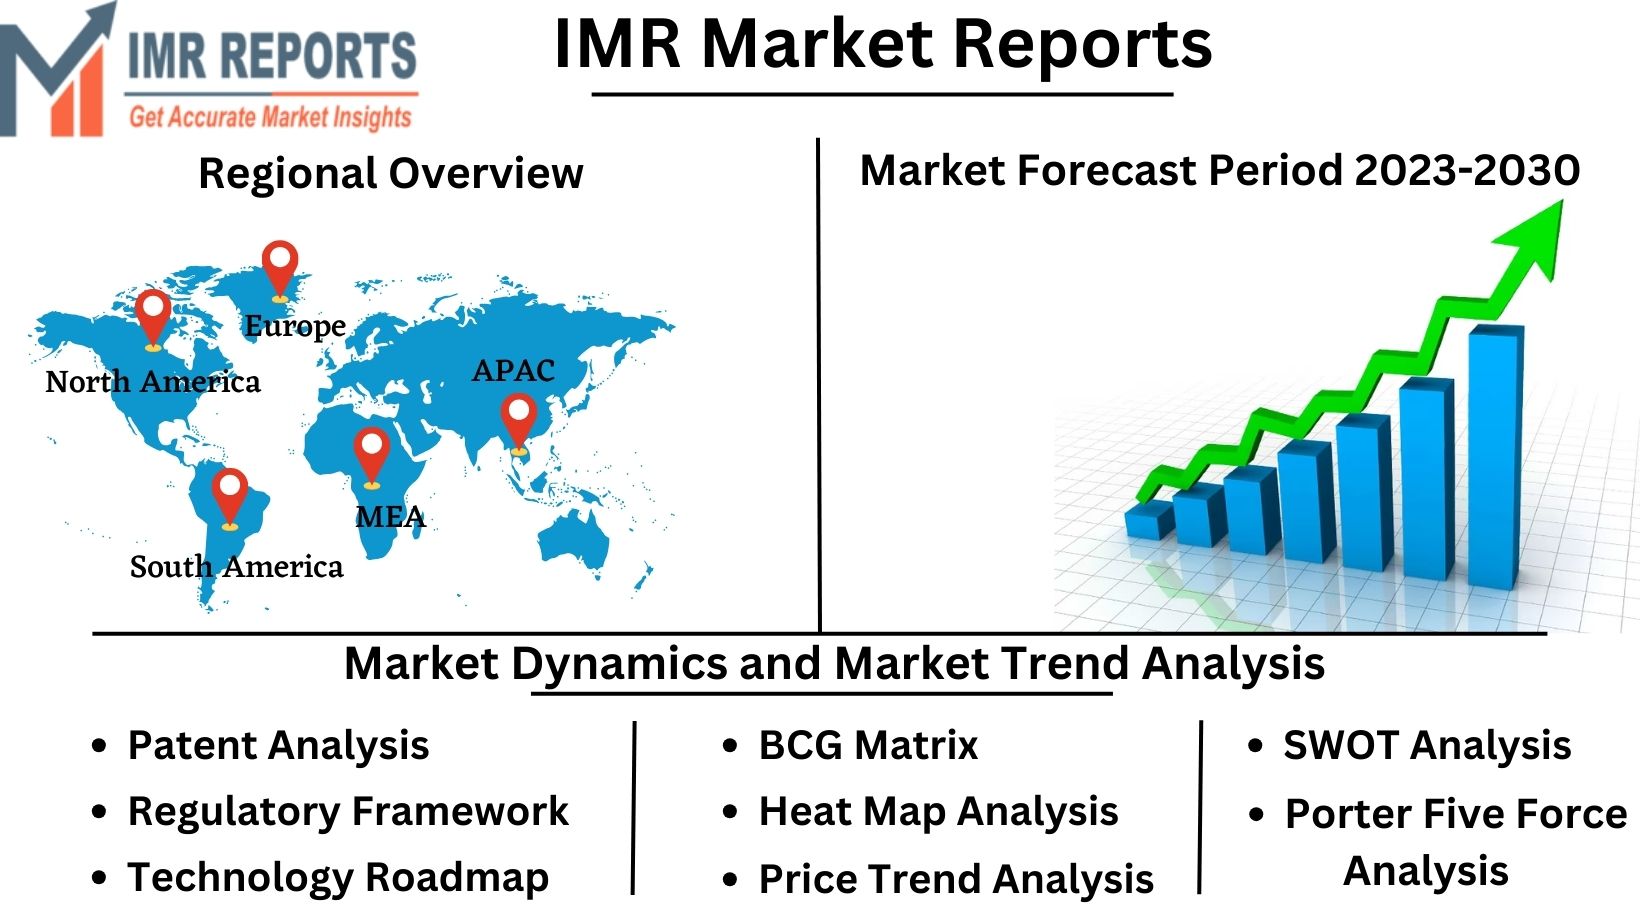 IMR_Market_Reports_(1)74